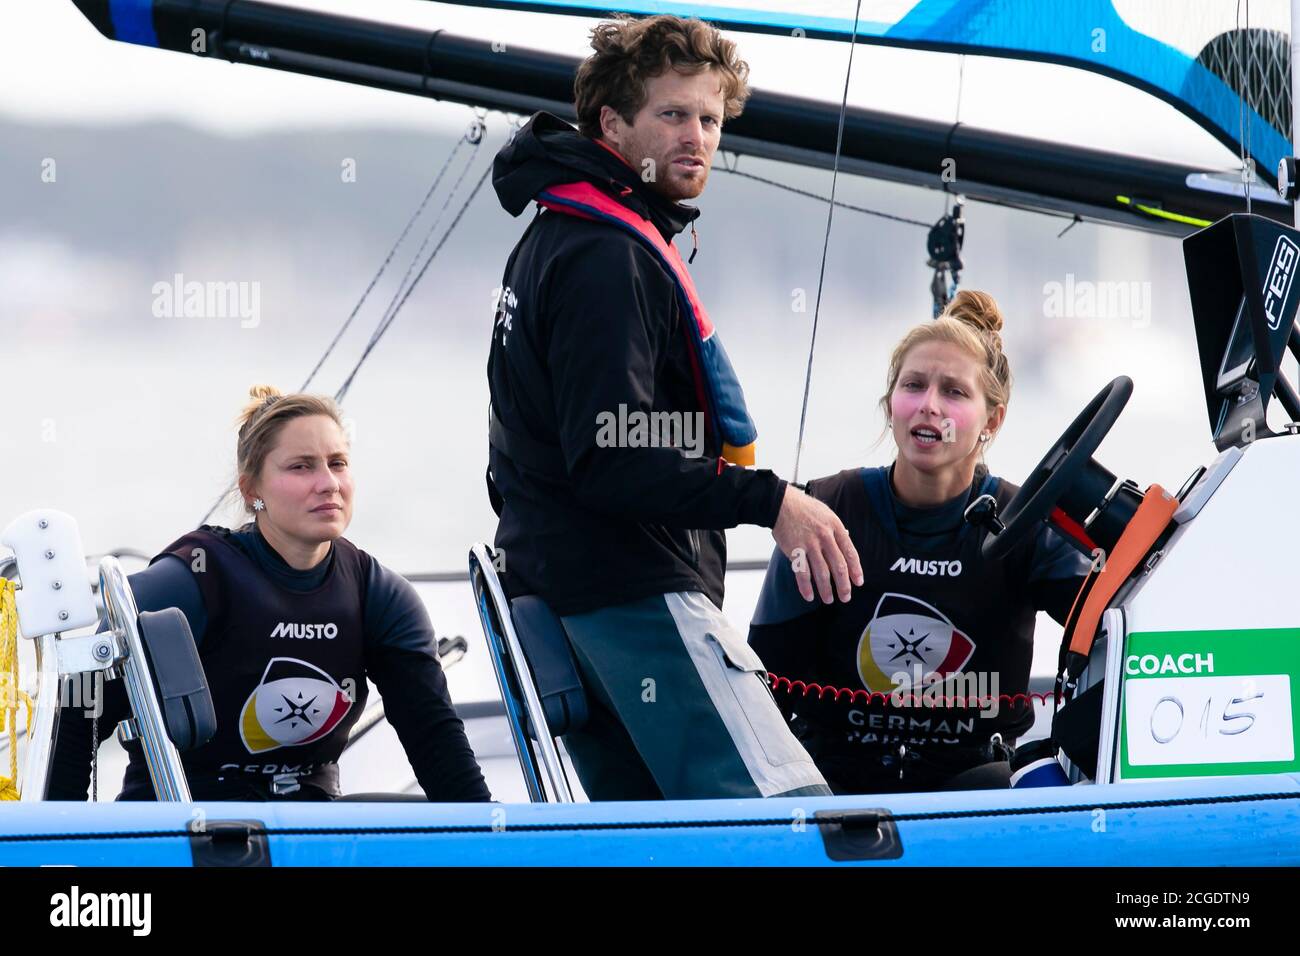 Kiel, Germany. 10th Sep, 2020. Berlin 49erFX sailors Vicky Jurczok (r) and Anika Lorenz look into the camera after a race at the 126th Kieler Woche. in the middle is national coach Dave Evans. The Kieler Woche is considered the world's largest sailing event and ends on 13.09.2020. Credit: Frank Molter/dpa/Alamy Live News Stock Photo